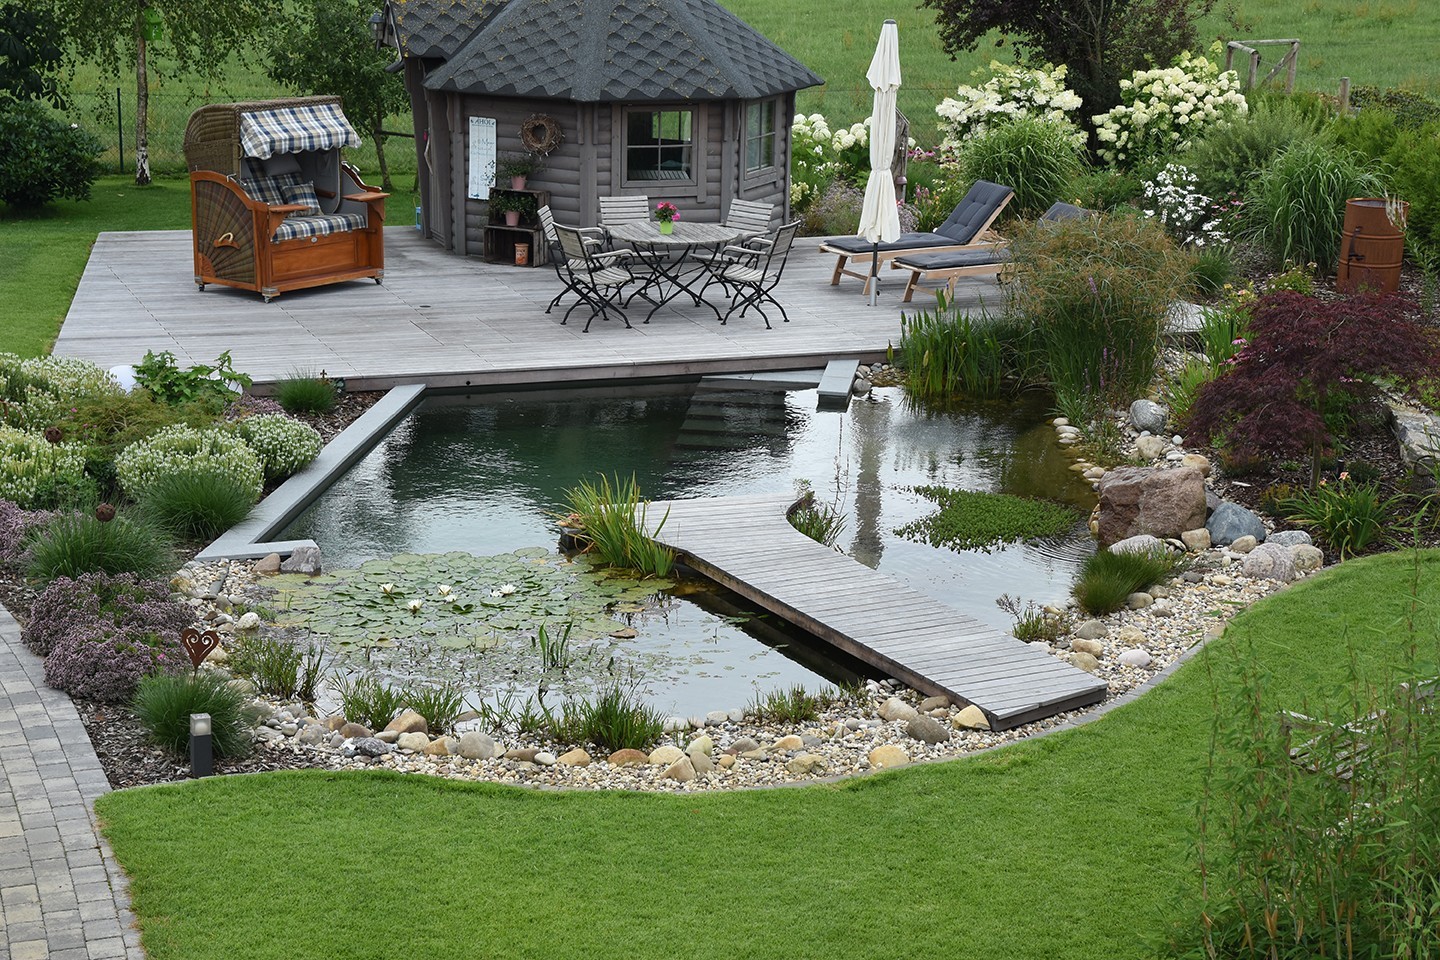 from-garden-pond-to-swimming-pond_Worpswede,DE_3